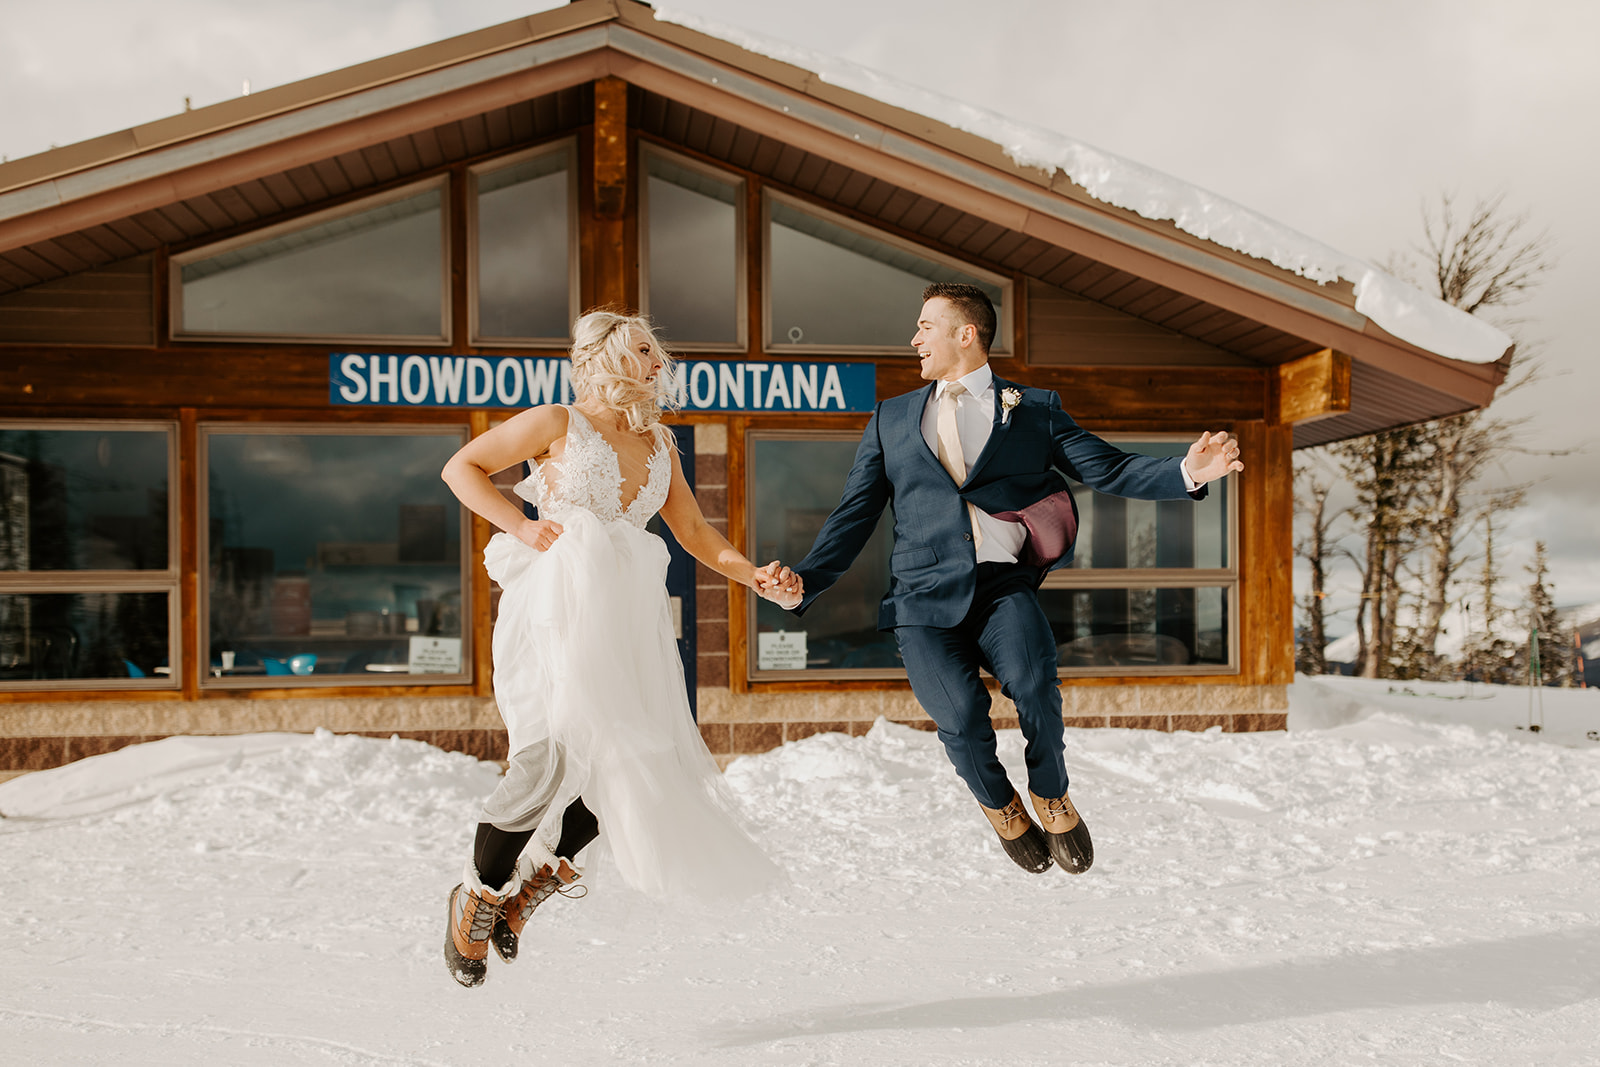 Adylee and Tyler jumping joyfully during their elopement at Showdown in Central Montana.